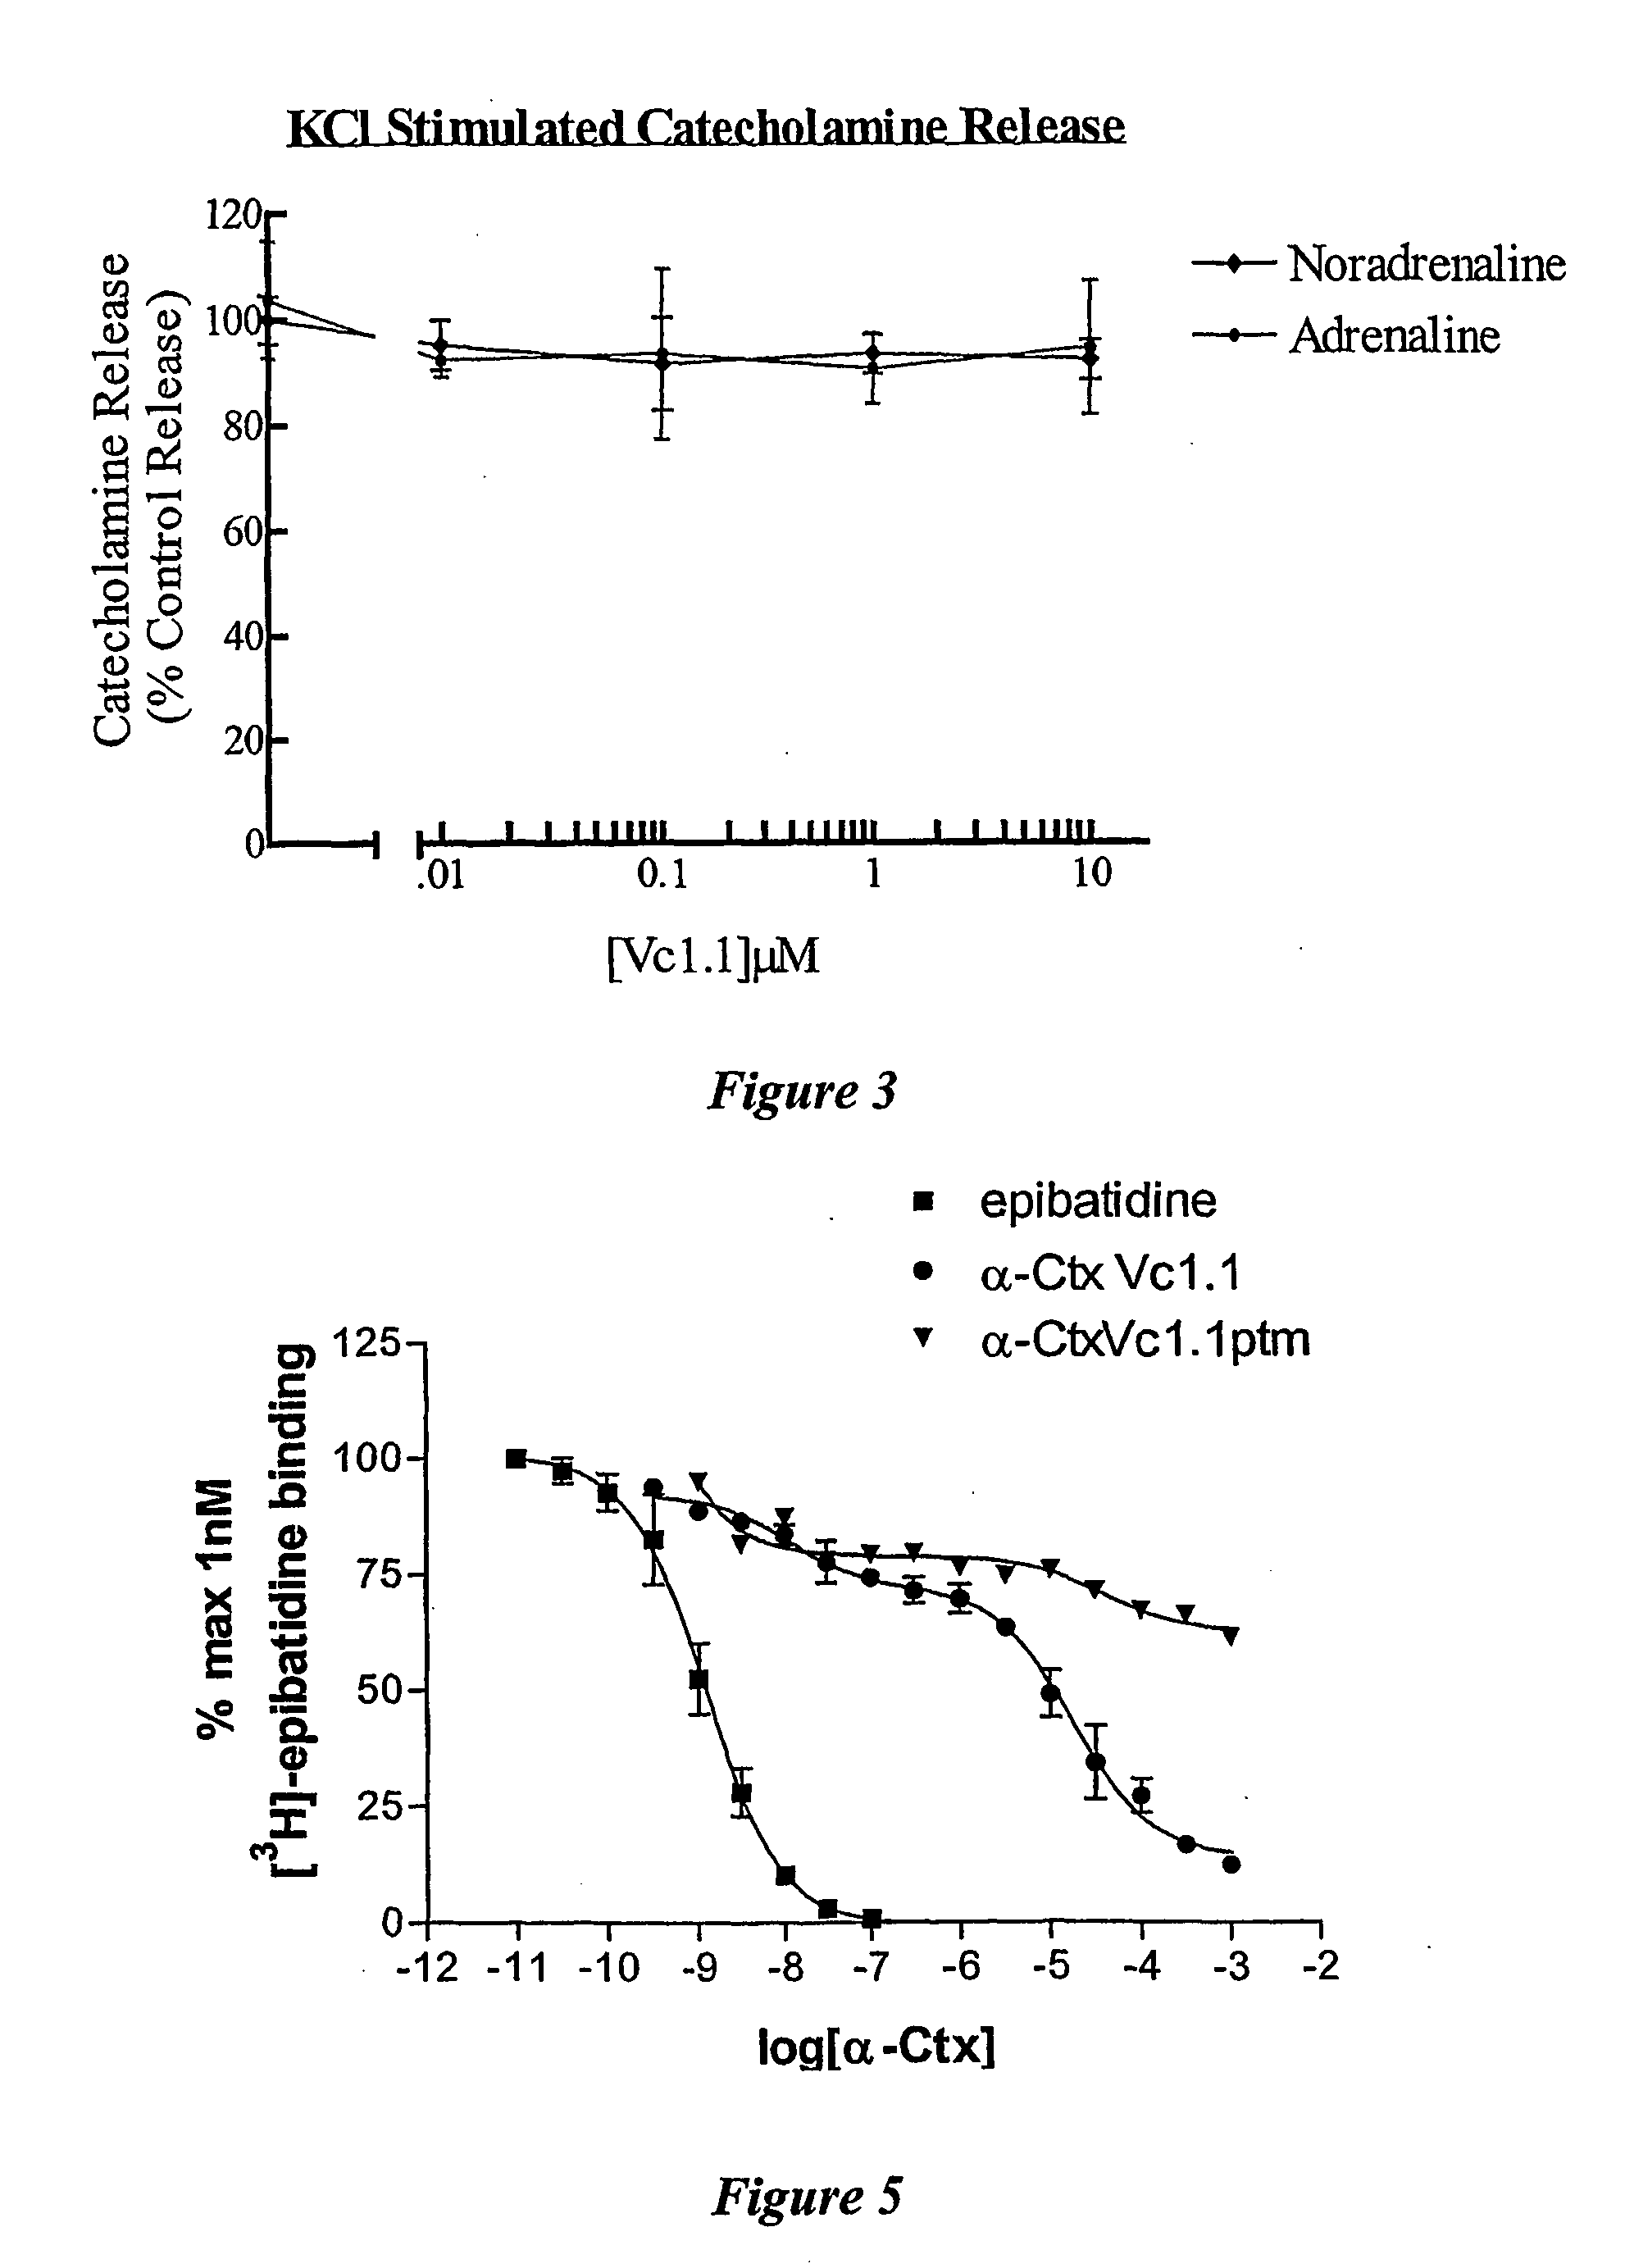 Alpha conotoxin peptides with analgesic properties